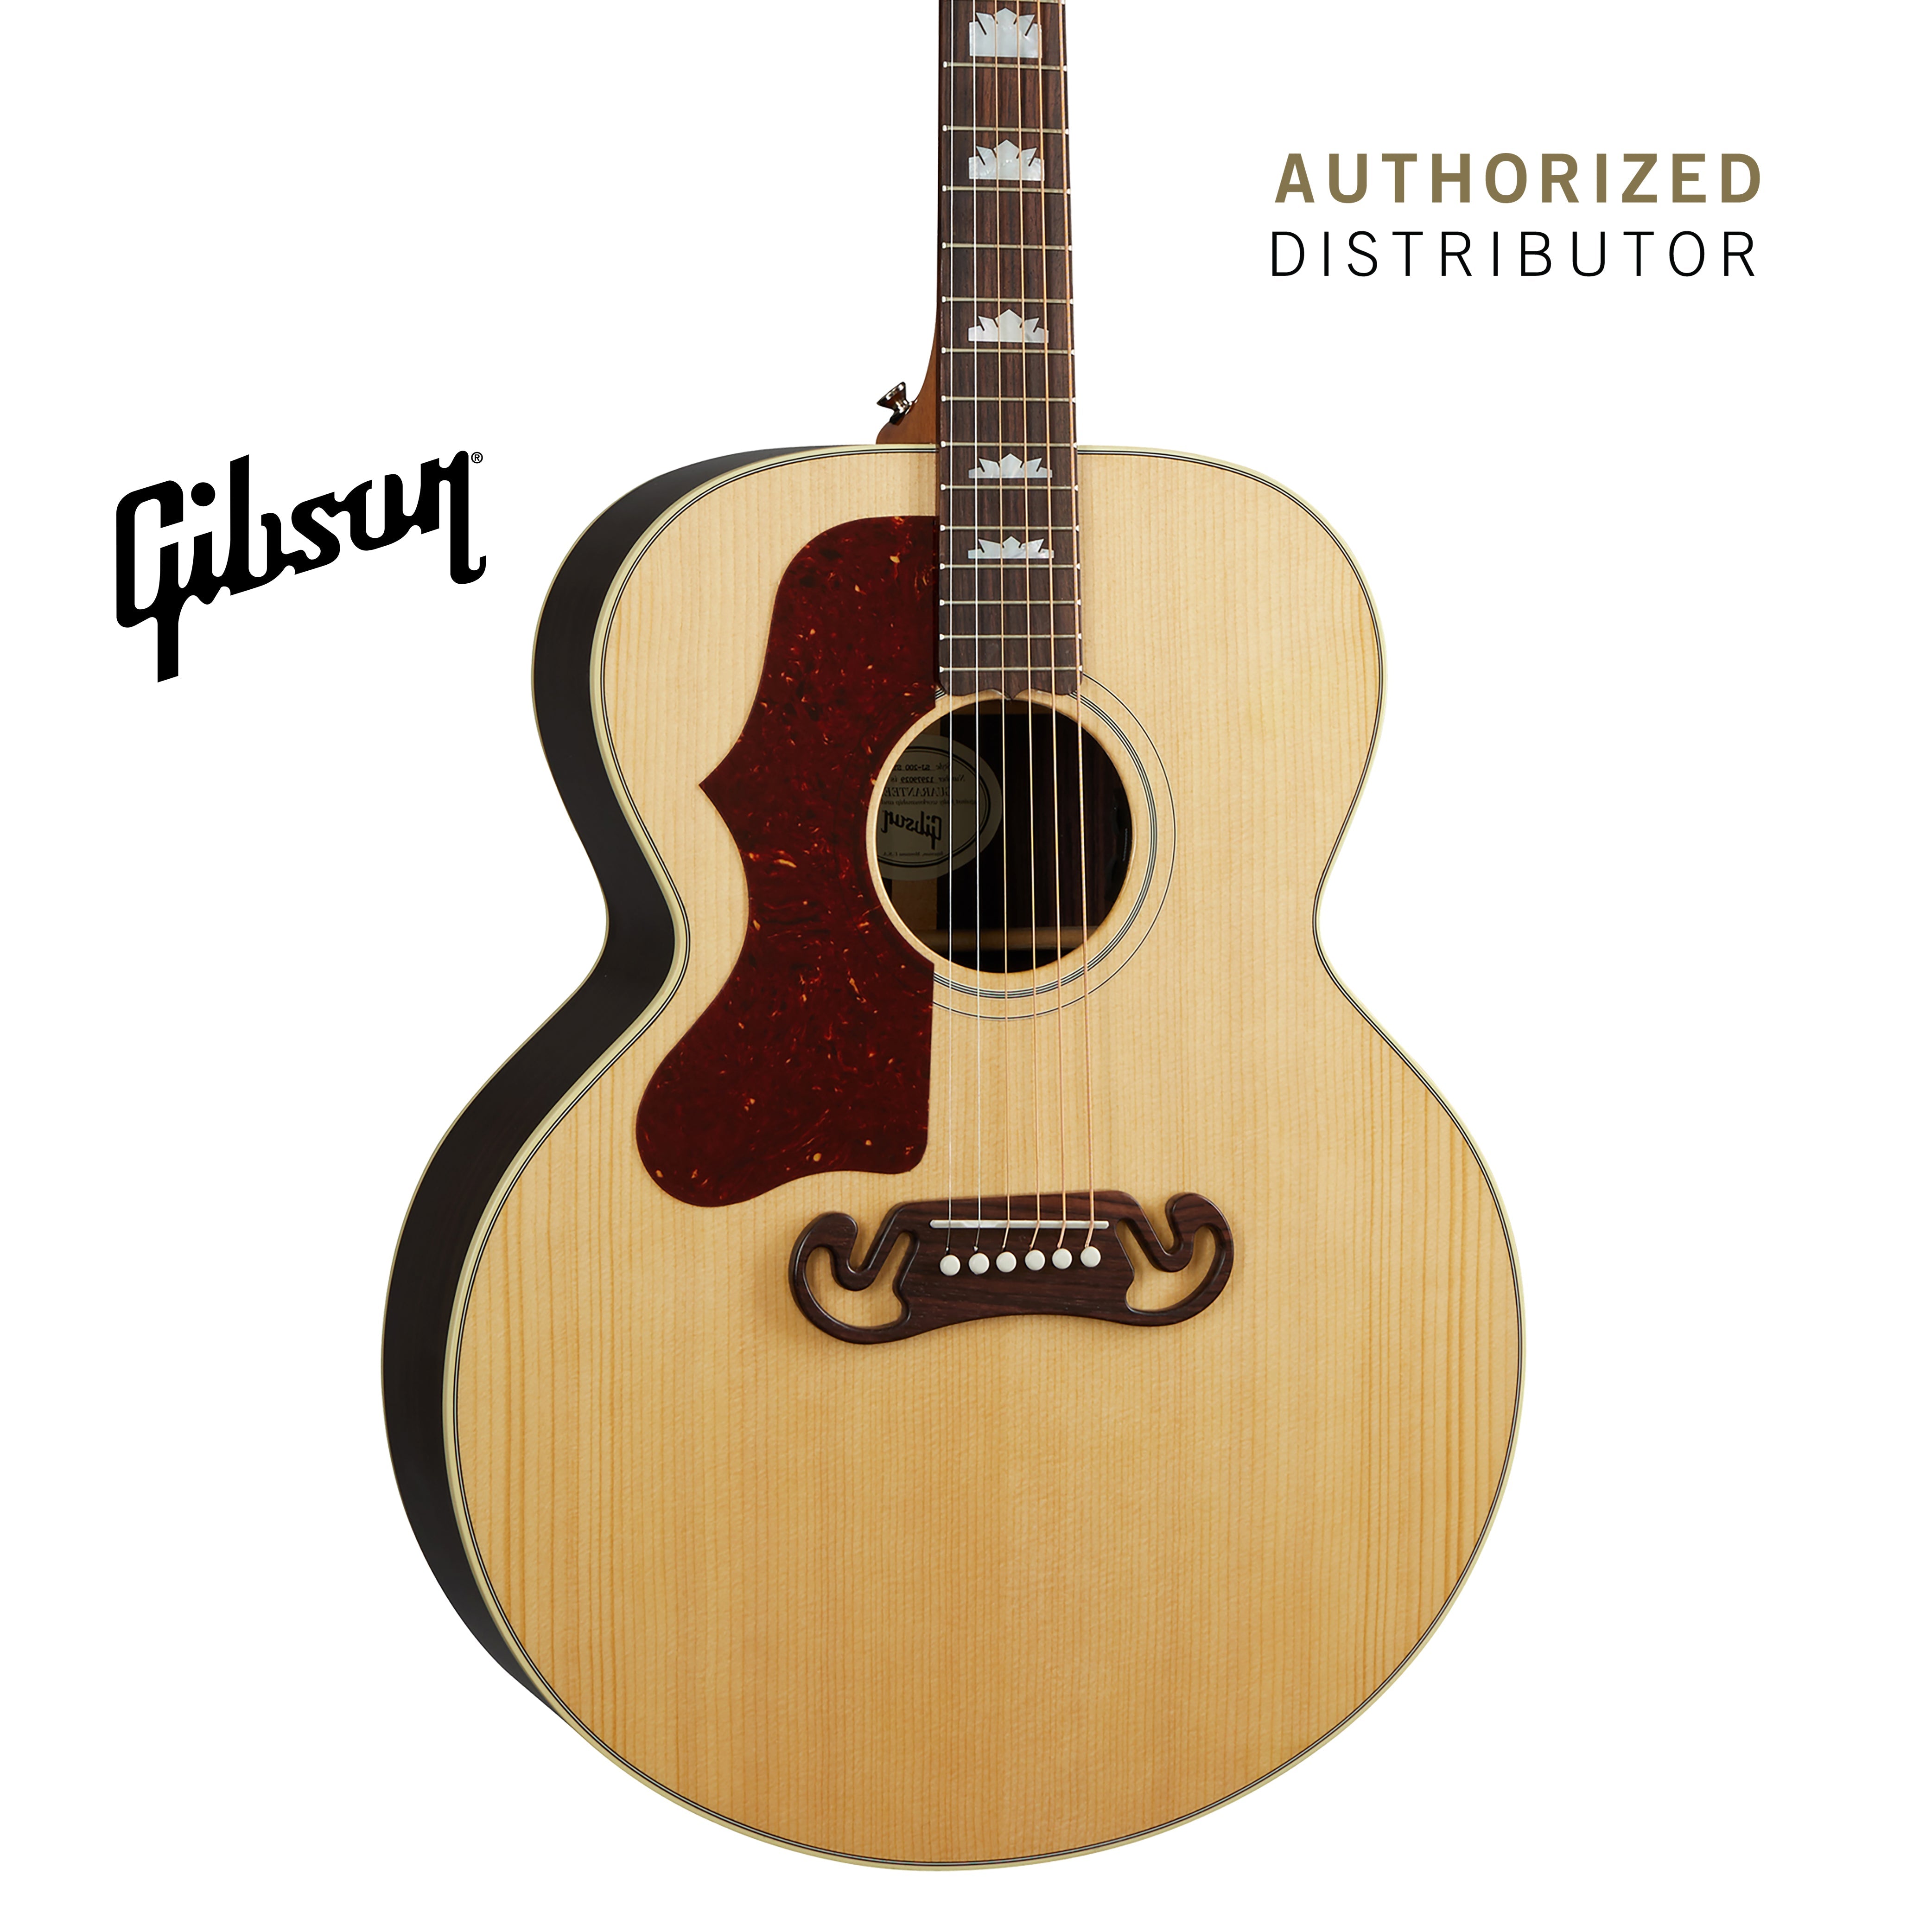 GIBSON SJ-200 STUDIO ROSEWOOD LEFT-HANDED ACOUSTIC-ELECTRIC GUITAR - ANTIQUE NATURAL